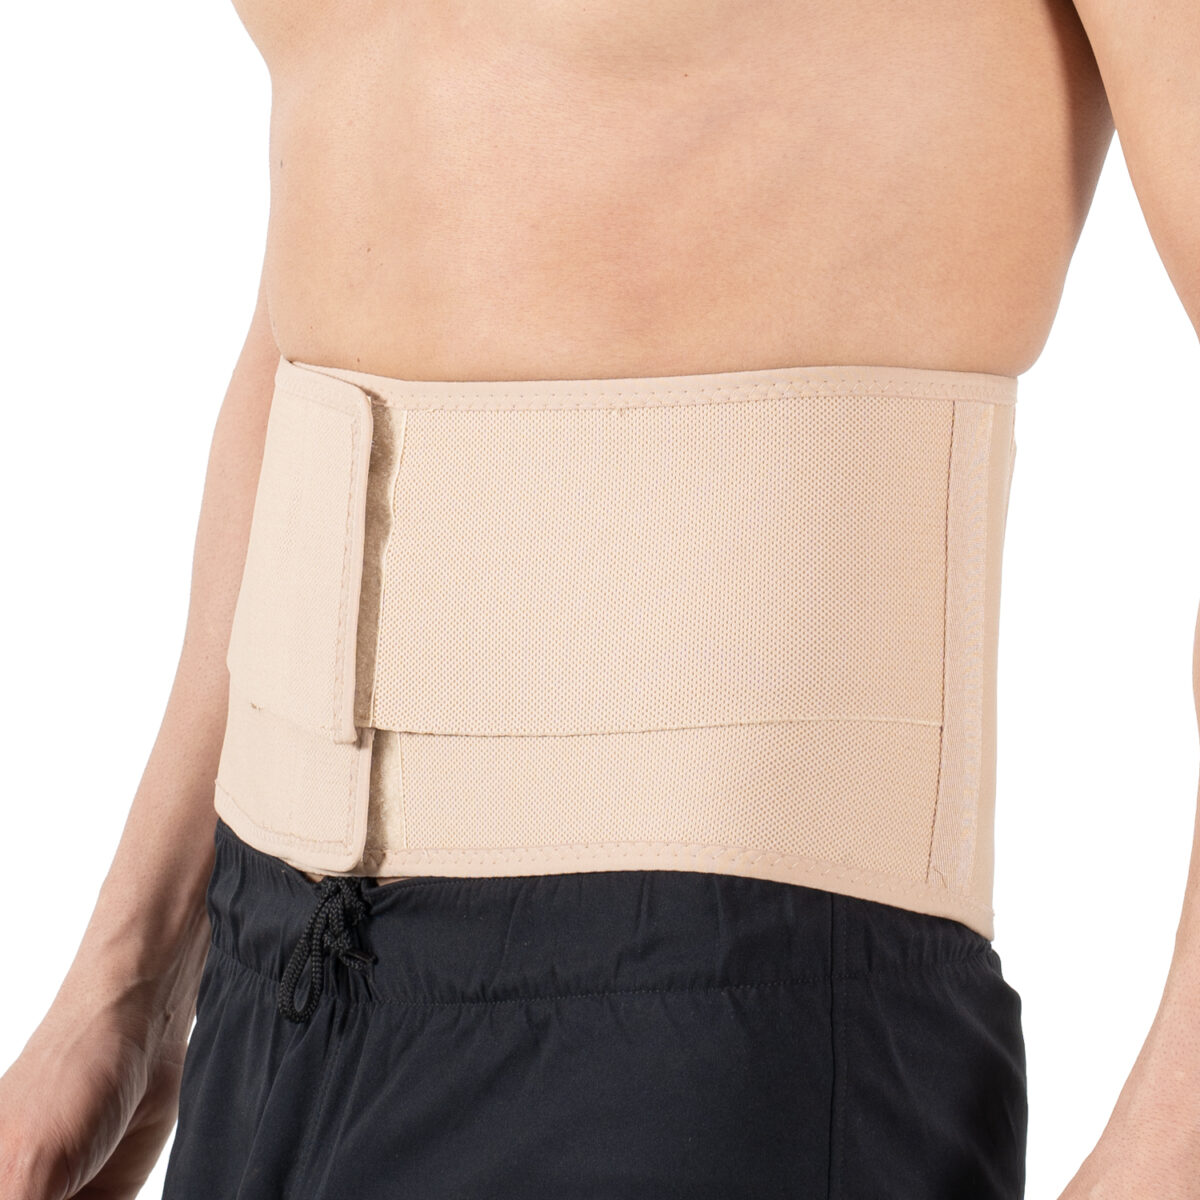 wingmed orthopedic products industrial back waist support w456 29